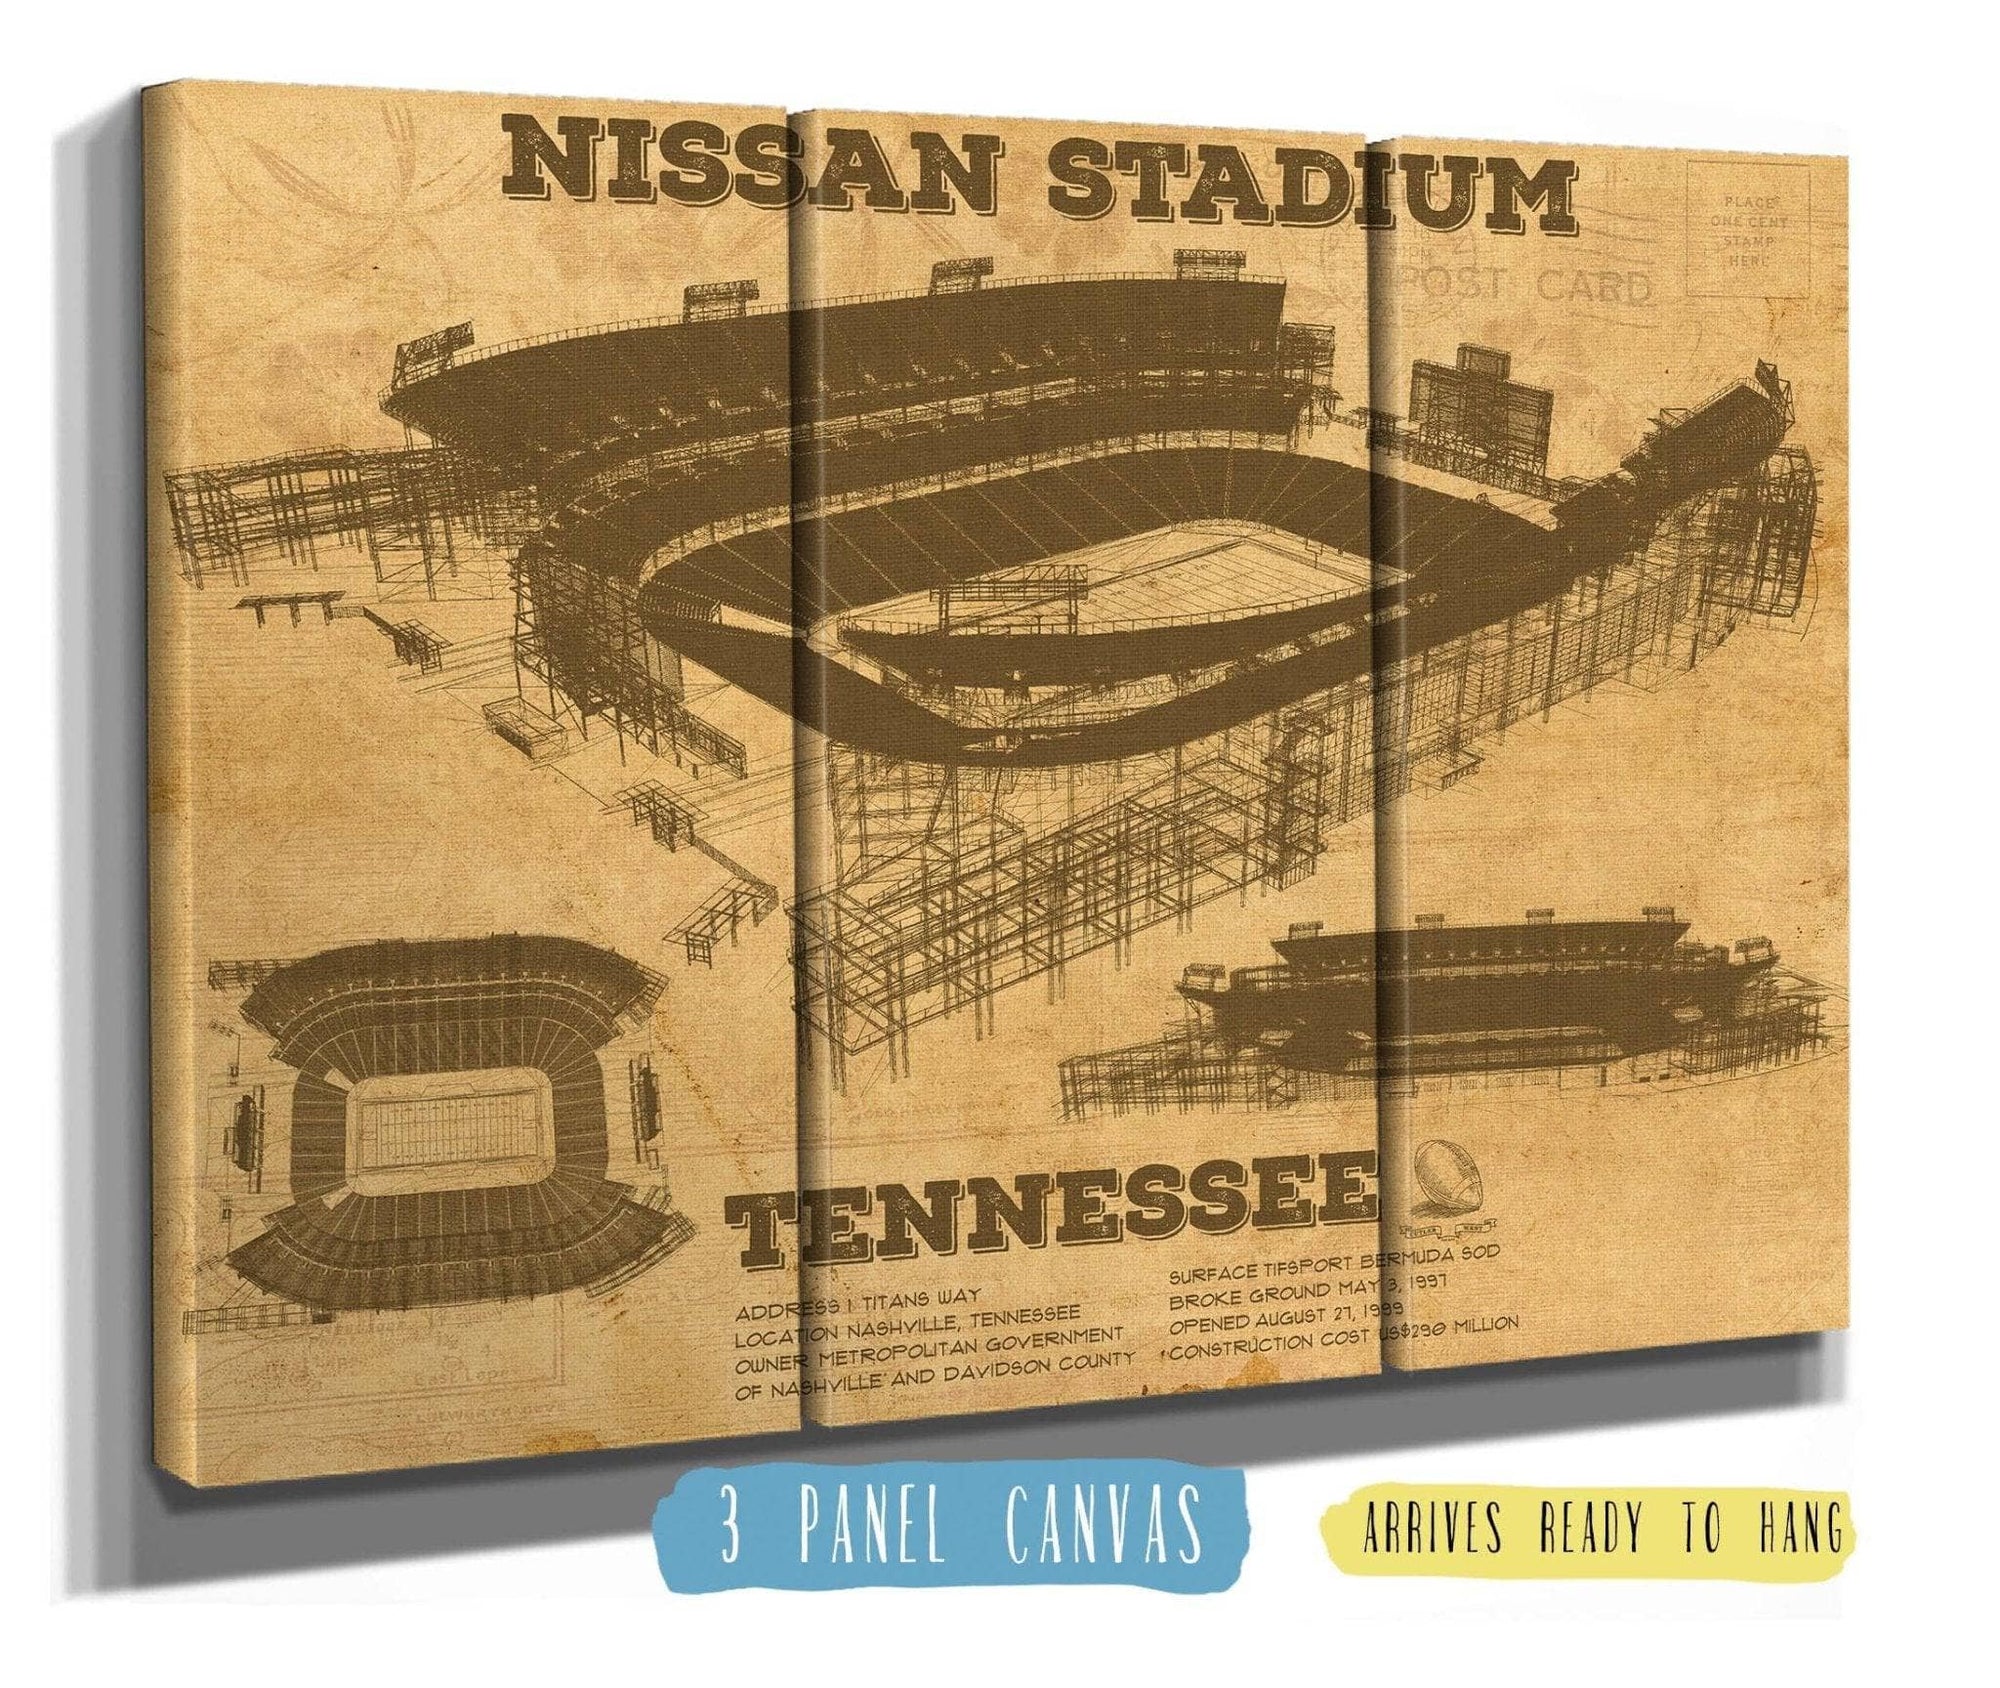 Cutler West Pro Football Collection 48" x 32" / 3 Panel Canvas Wrap Tennessee Titans Nissan Stadium - Vintage Football Print 723978276_71137